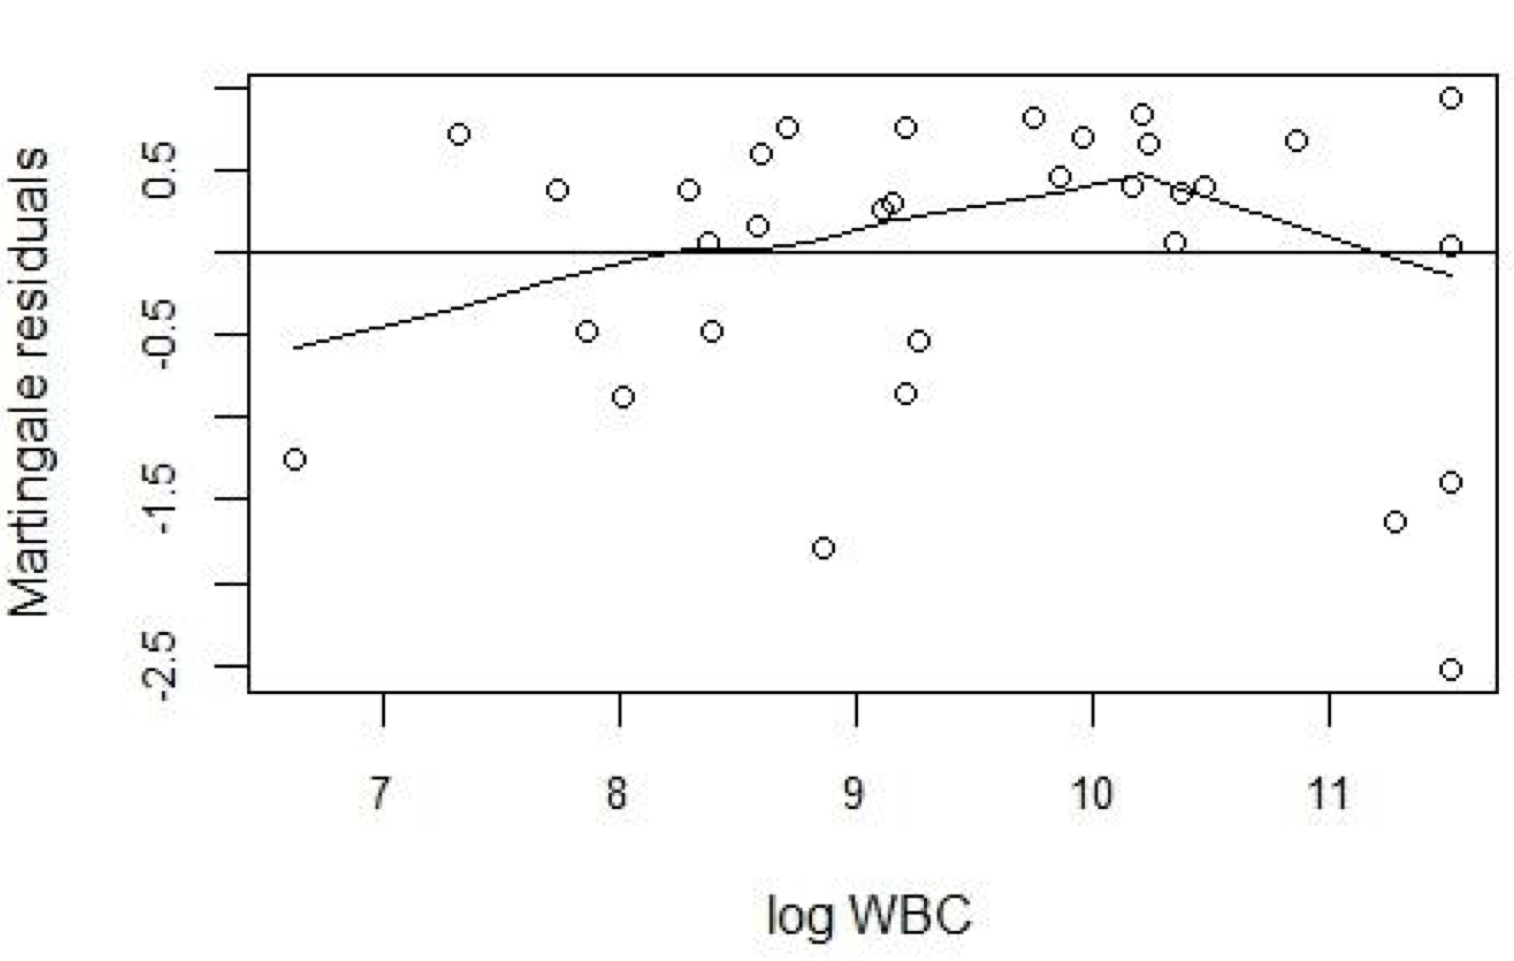 Plot of Martingale residuals (from a model with AG and log(WBC)) against log WBC.